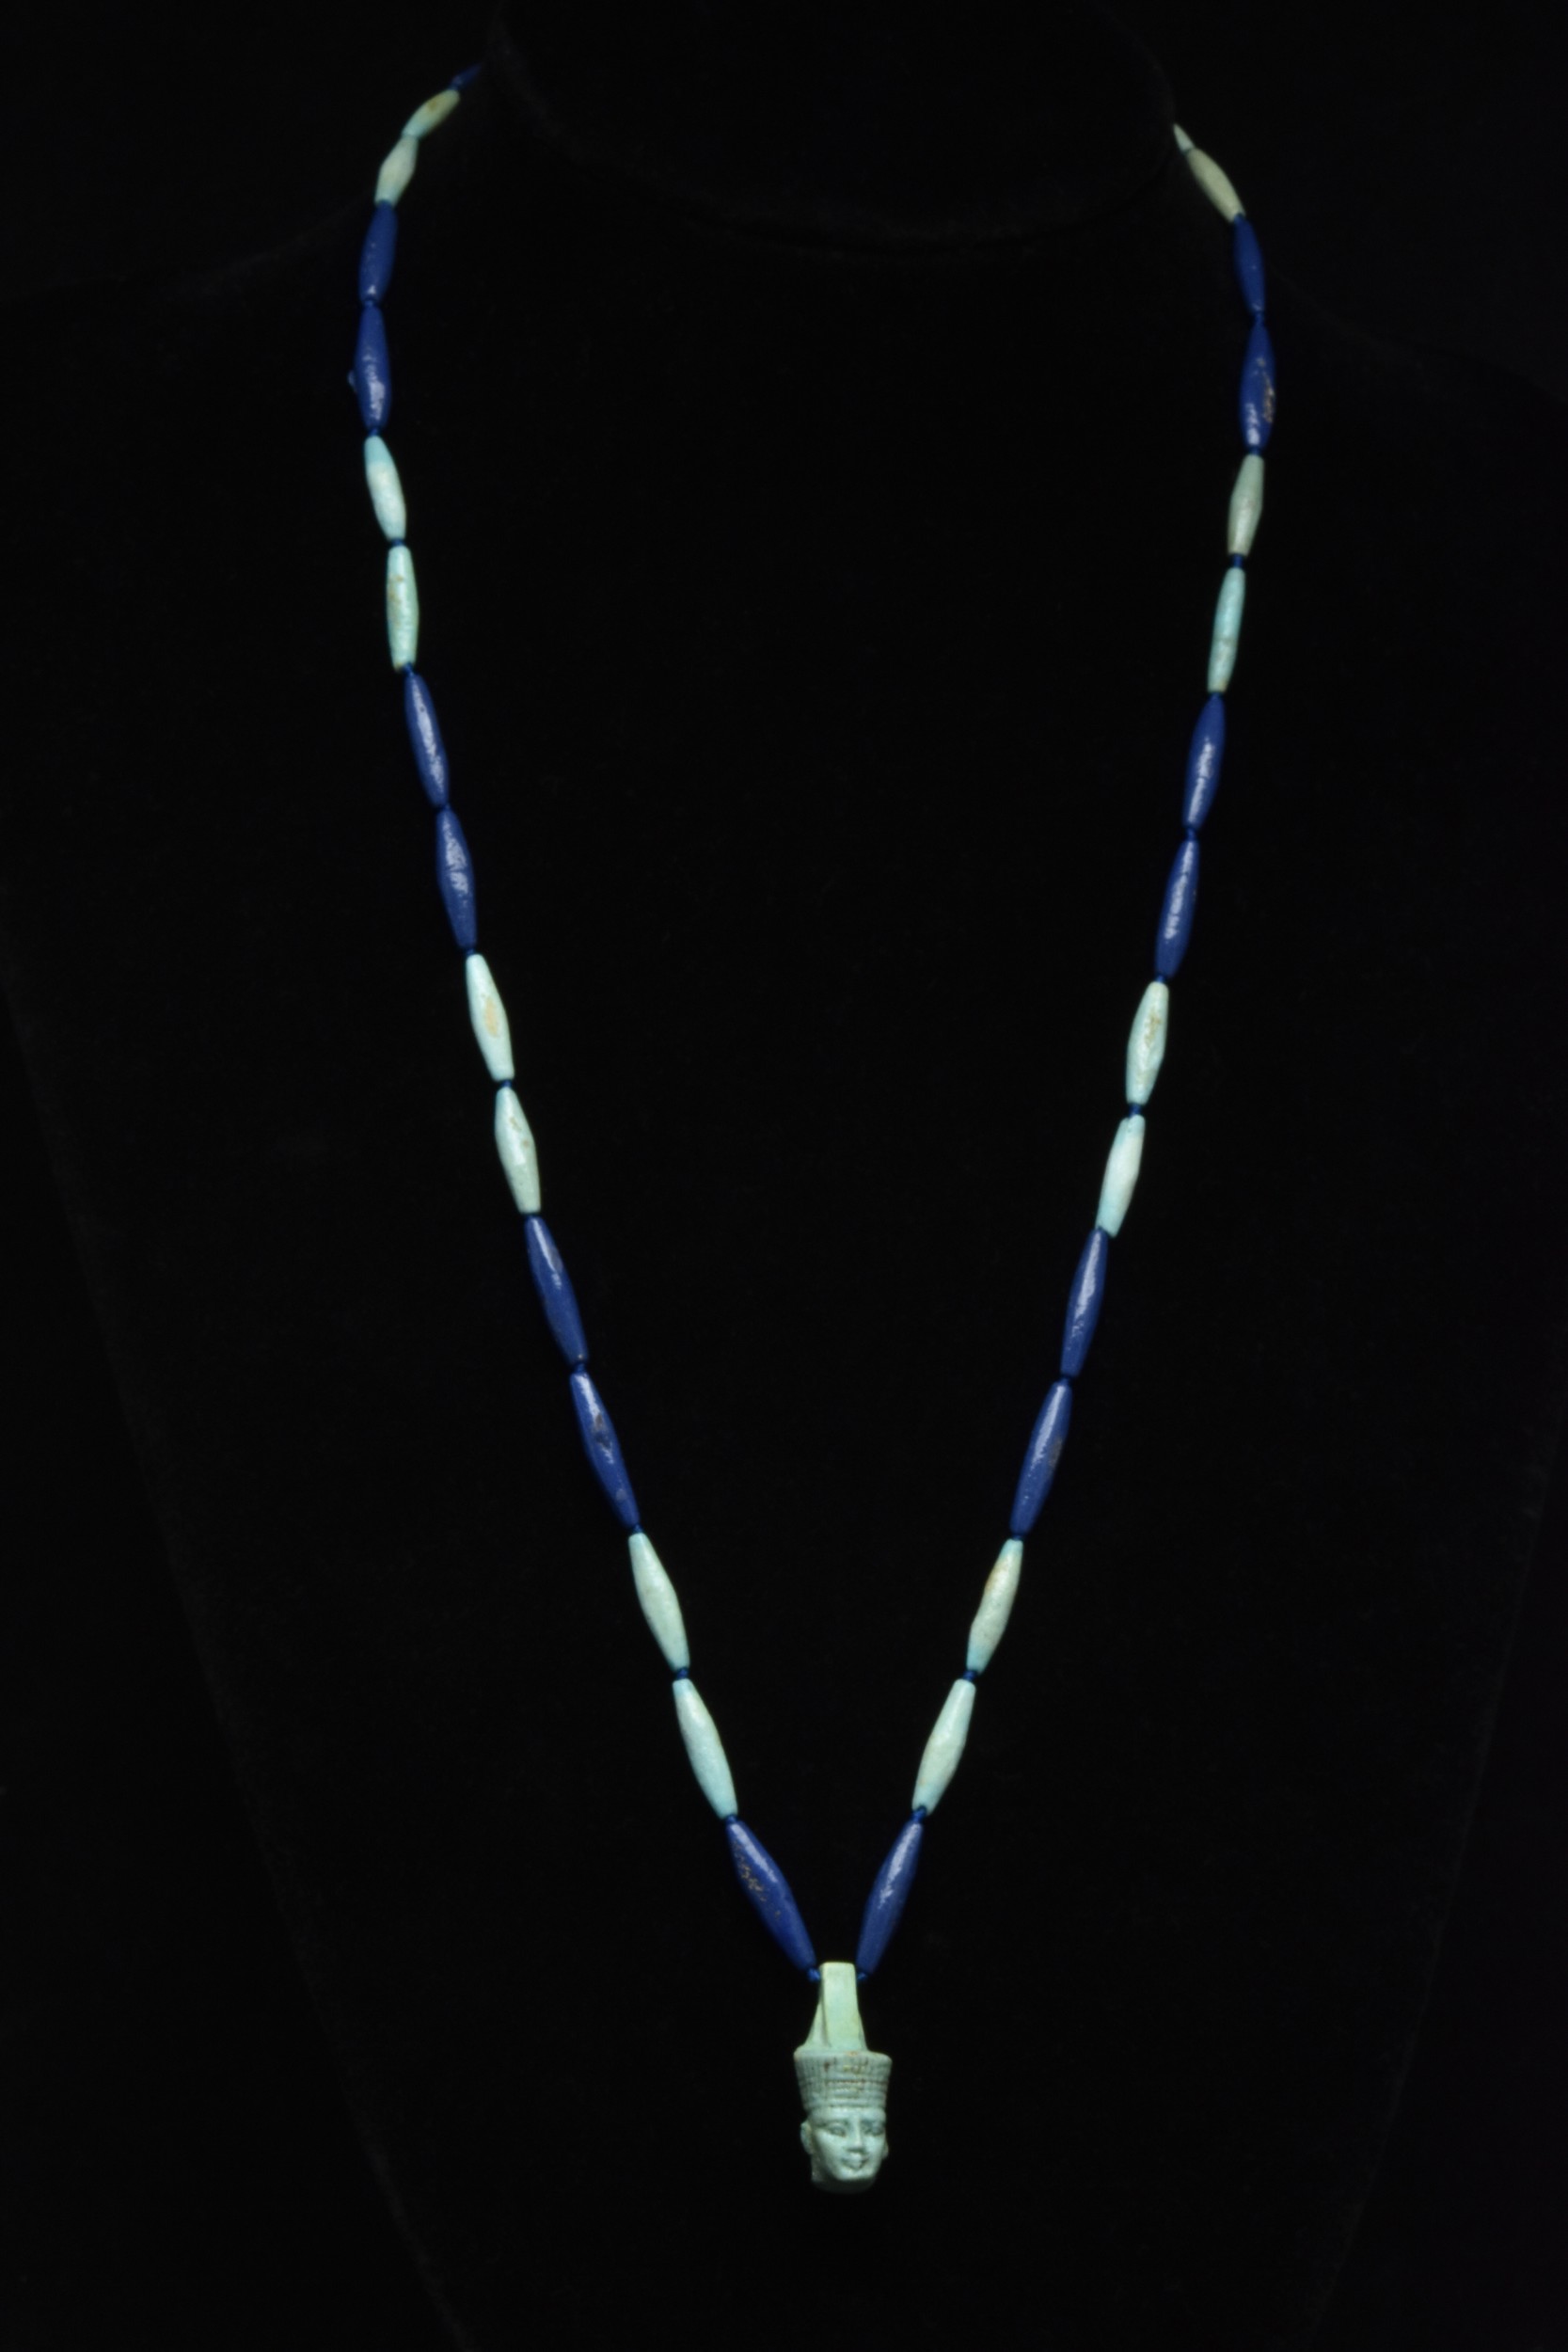 EGYPTIAN FAIENCE NECKLACE WITH NEITH AMULET